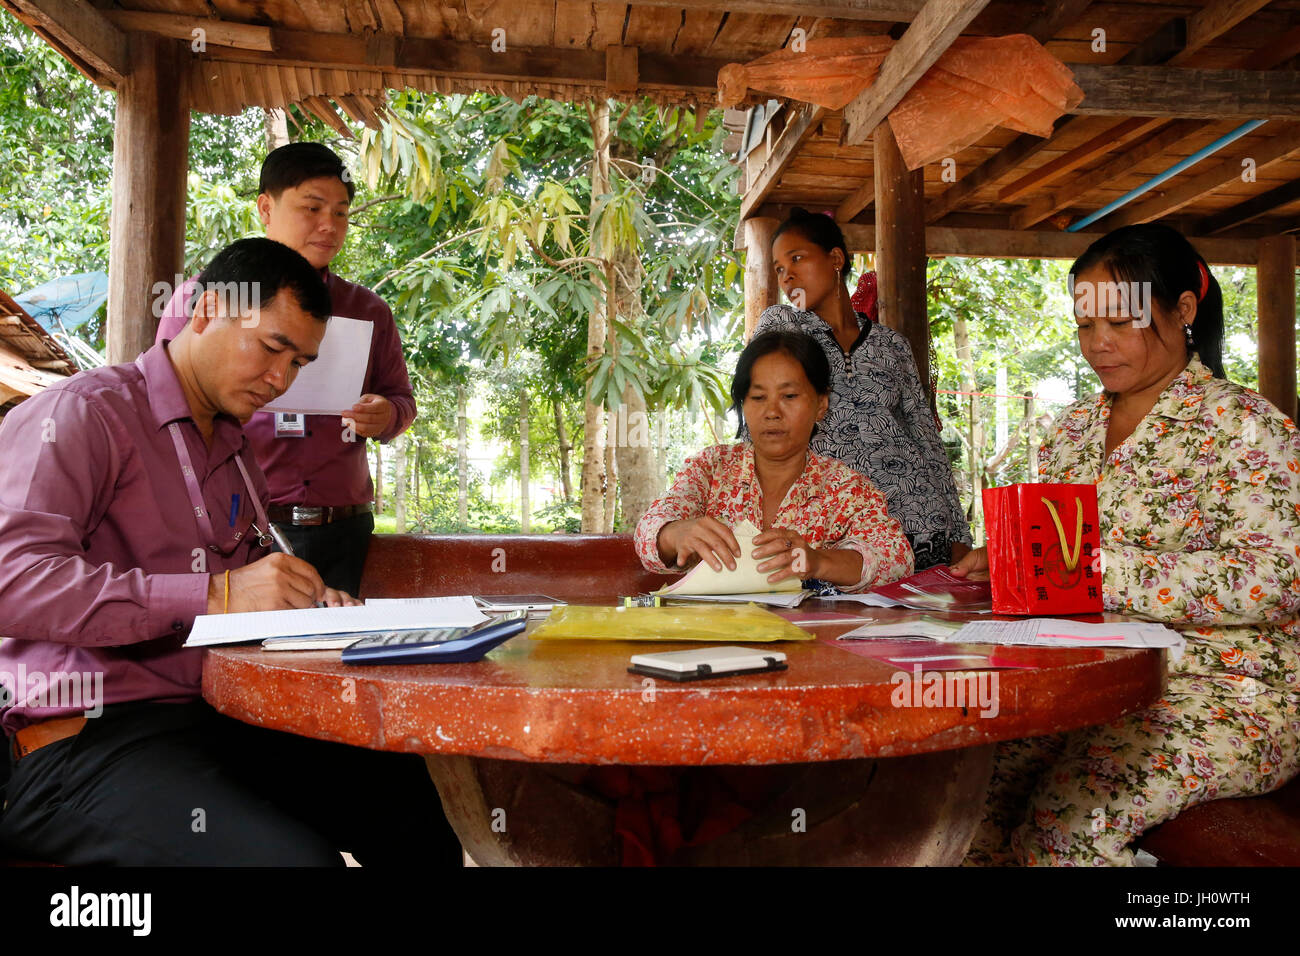 Repayment of a group loan collected by employees of AMK microfinance.  Cambodia. Stock Photo